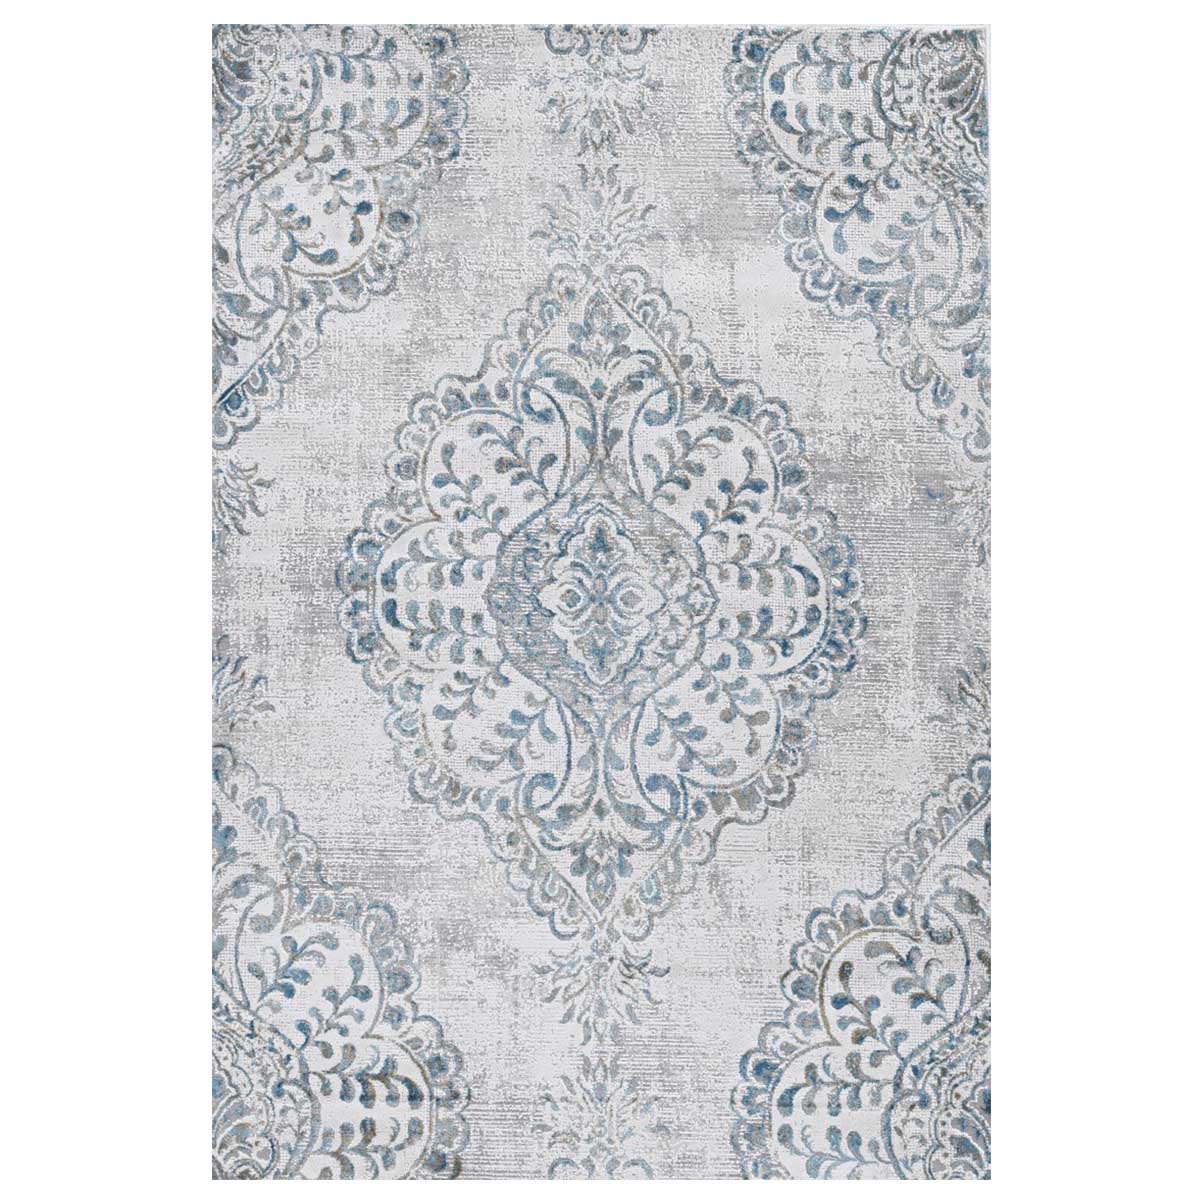 Kas Generations Ivory and Teal 5'3" x 7'7" Rug